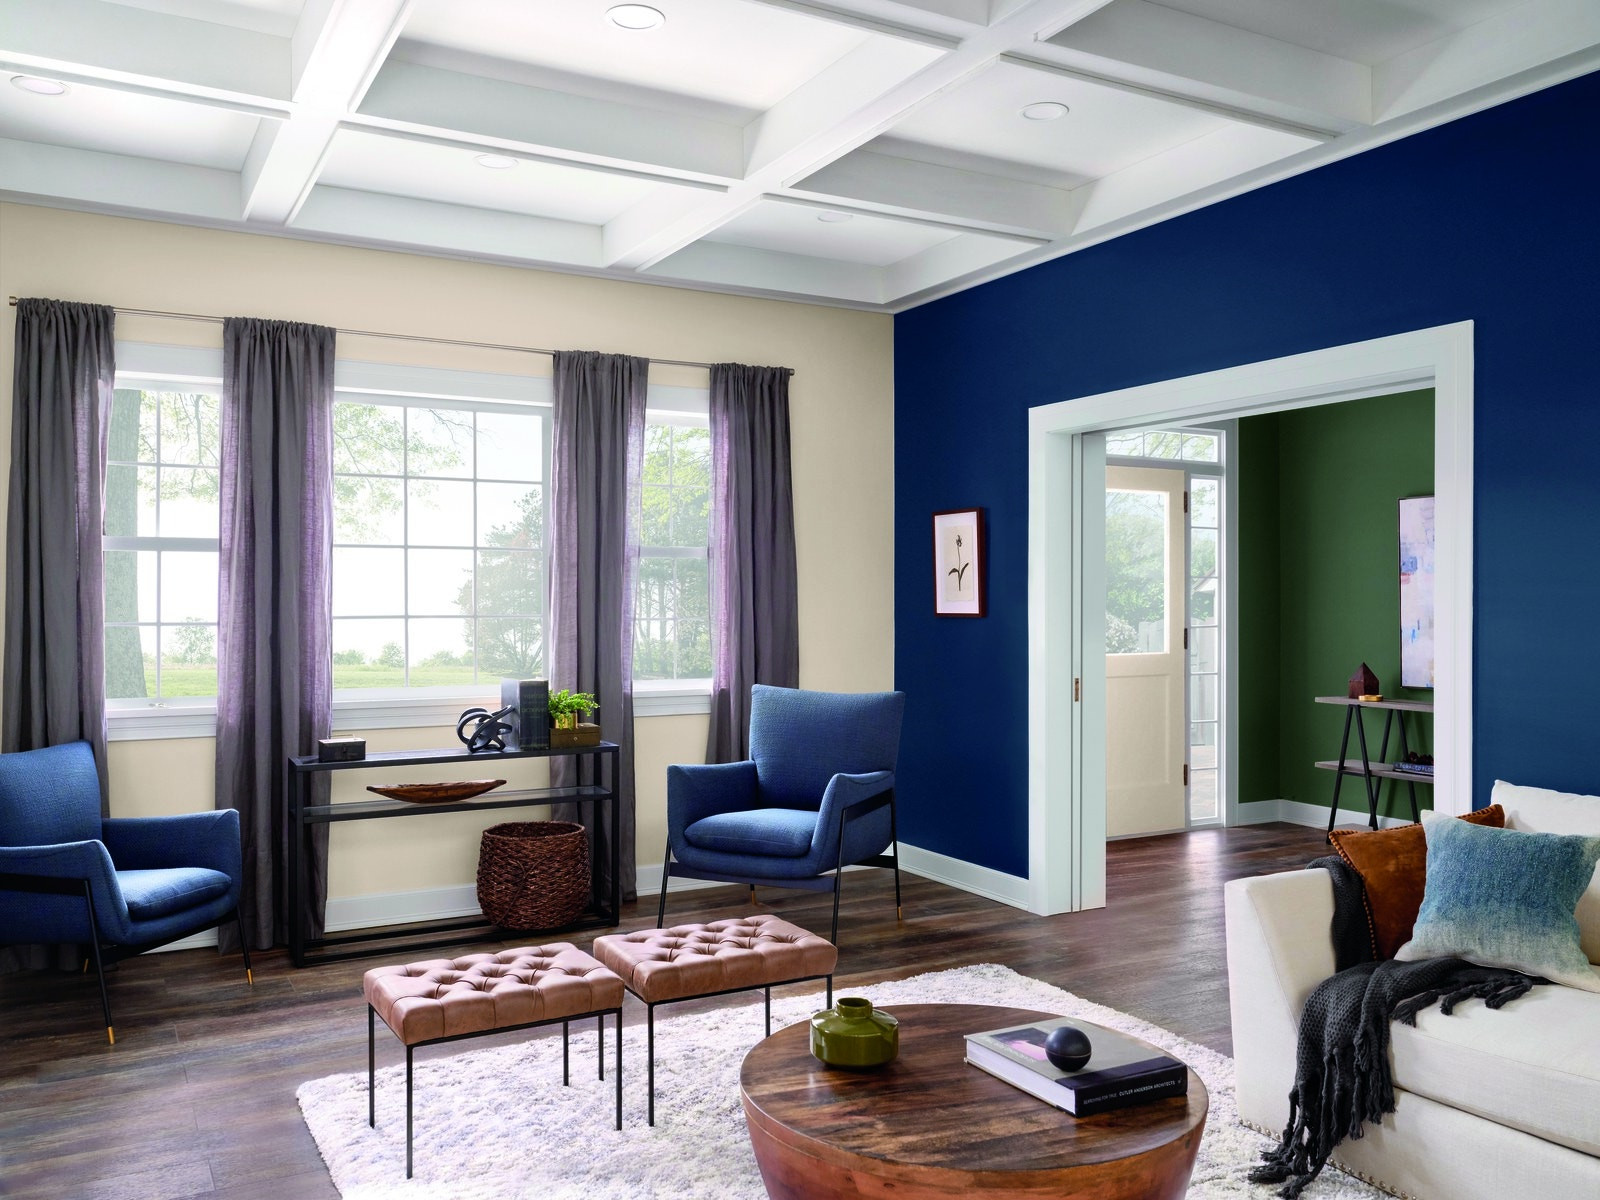 Living Room Color Schemes 2020
 The Color Trends We’ll Be Seeing in 2020 According to